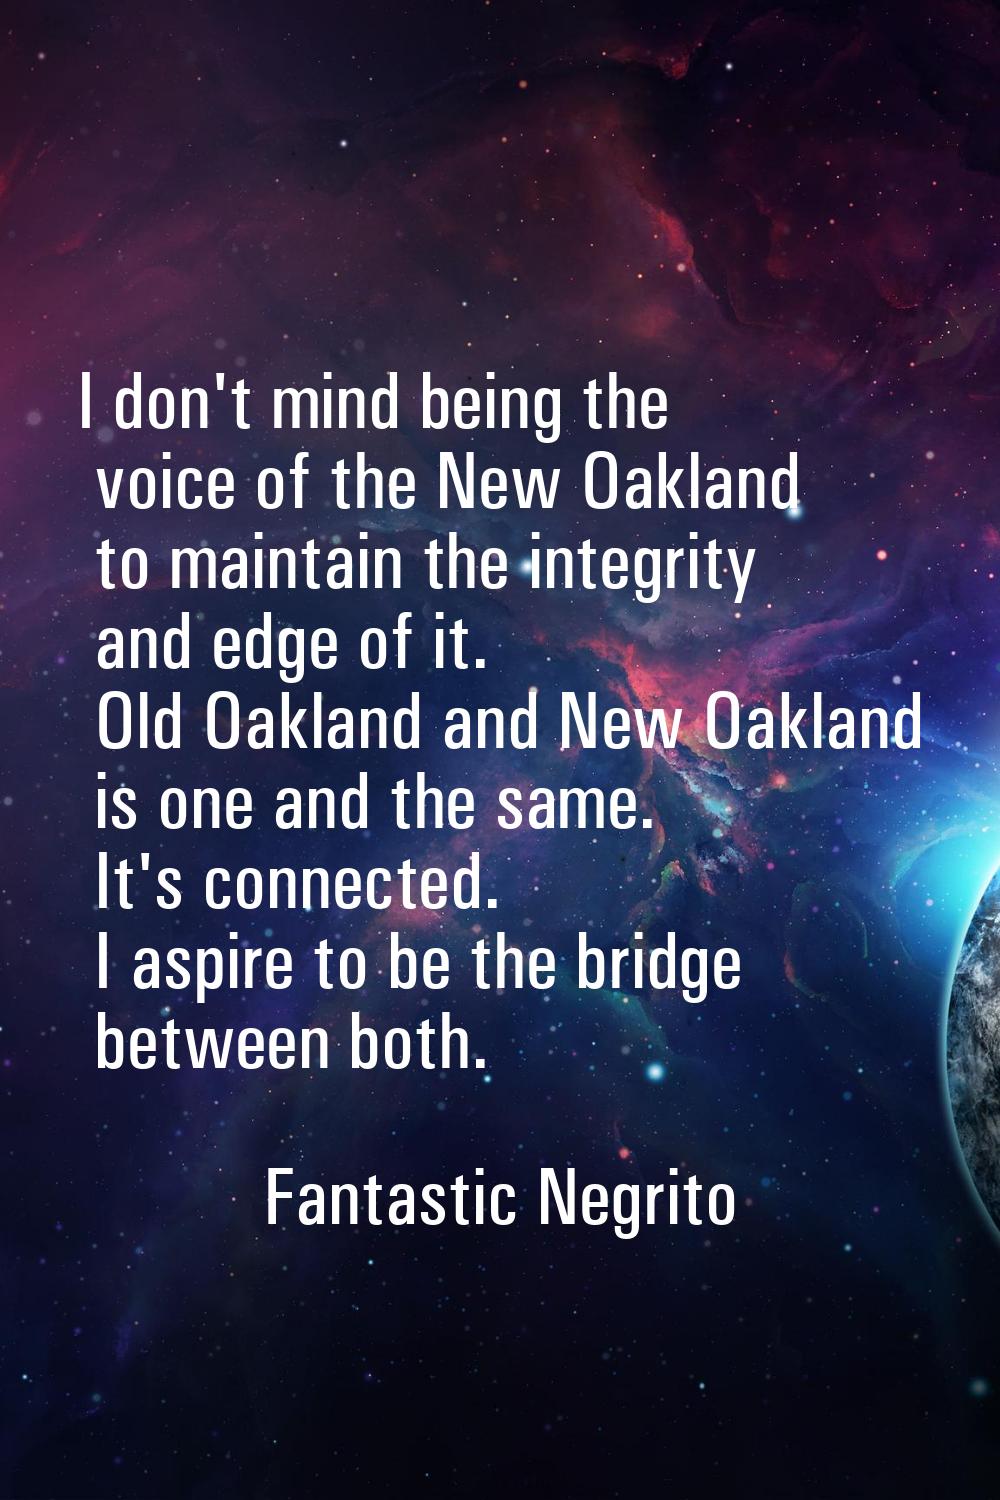 I don't mind being the voice of the New Oakland to maintain the integrity and edge of it. Old Oakla